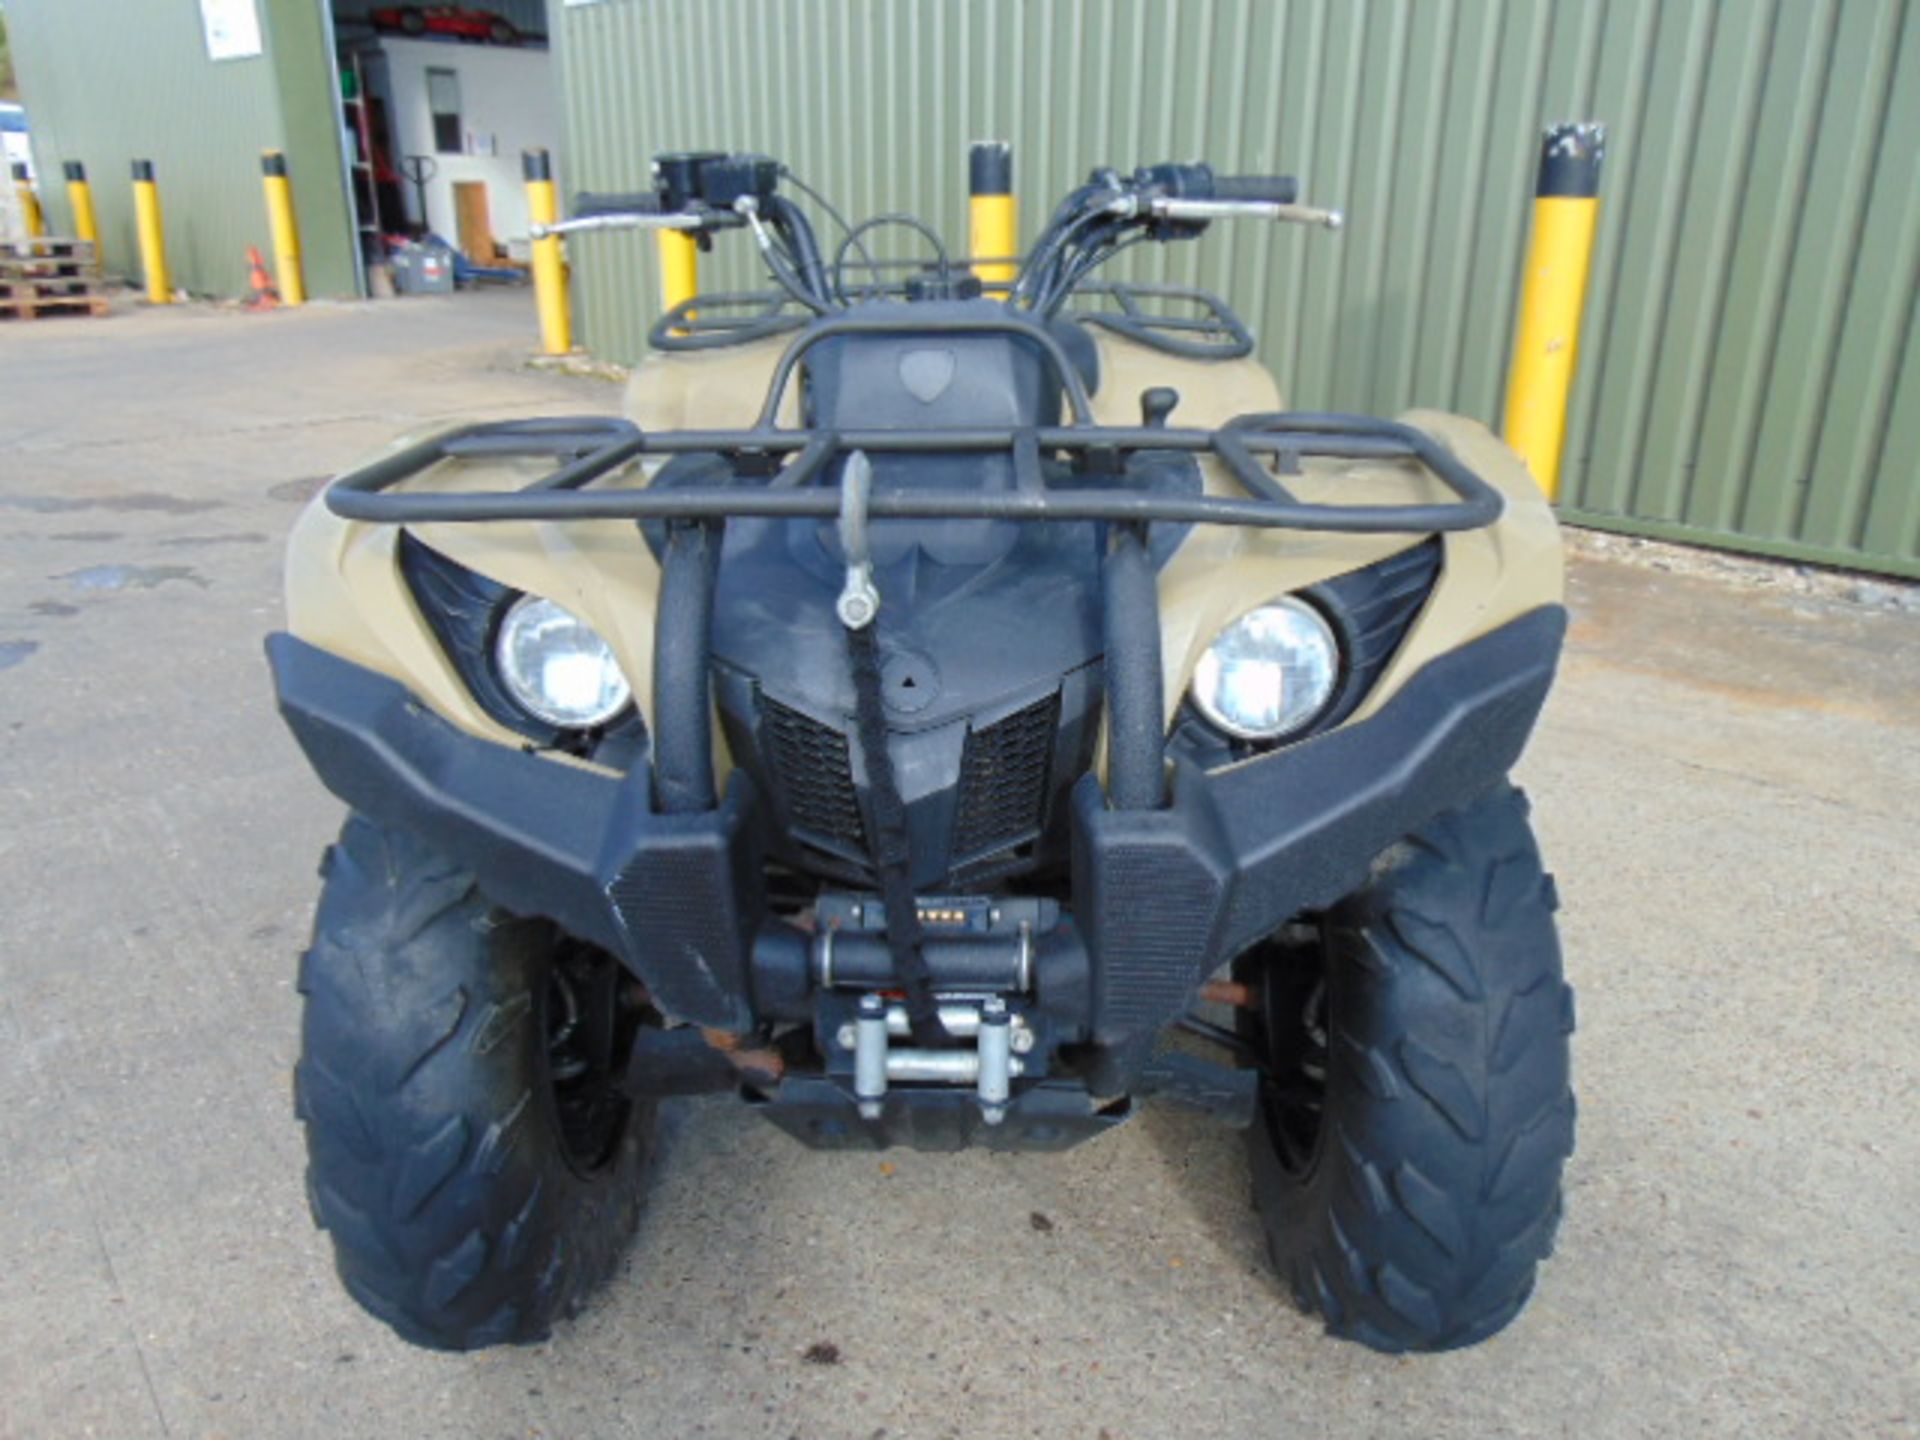 Military Specification Yamaha Grizzly 450 4 x 4 ATV Quad Bike Complete with Winch ONLY 130 HOURS! - Image 2 of 20